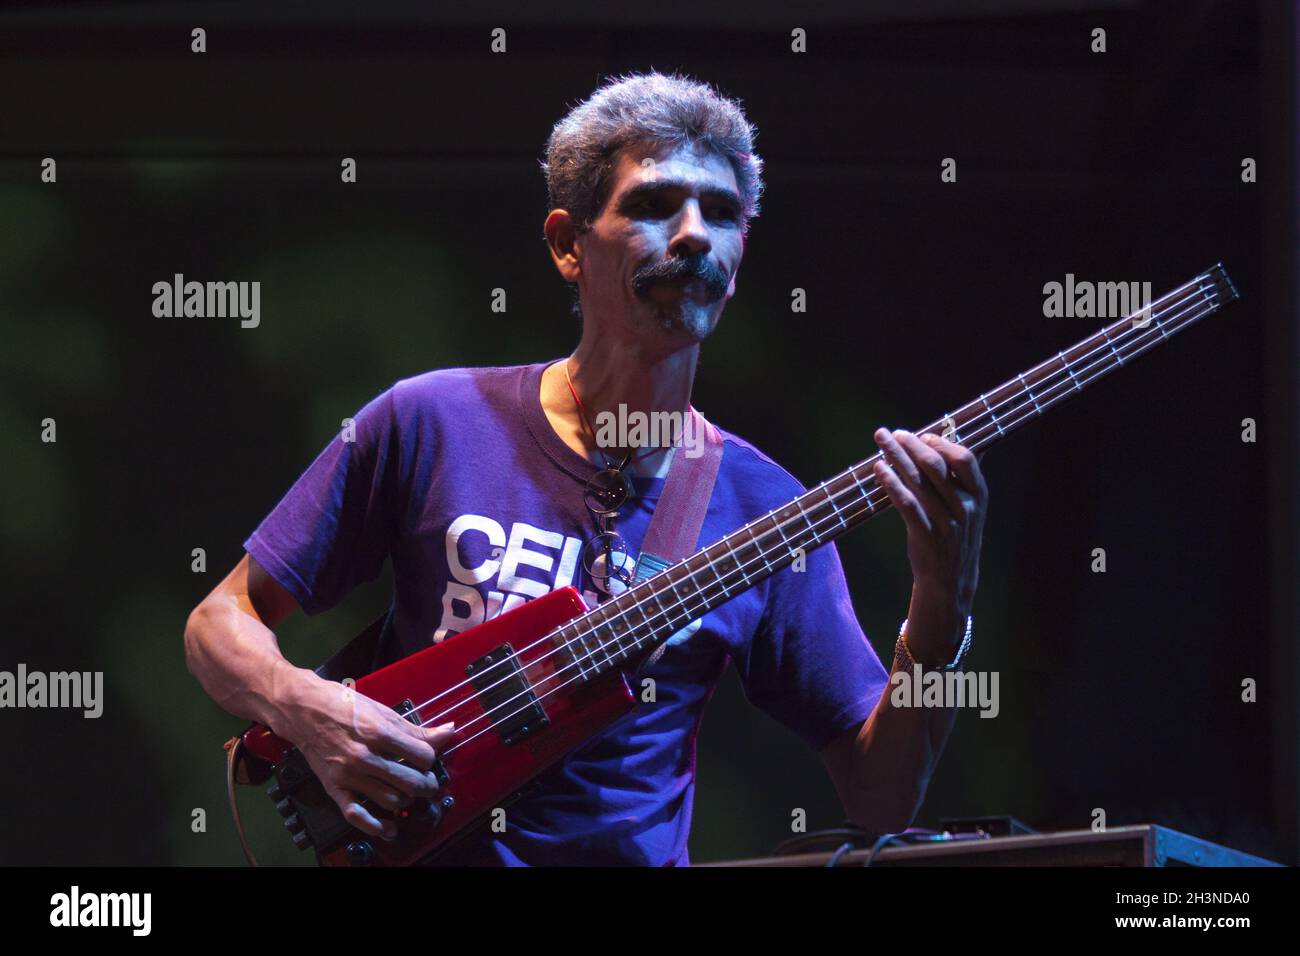 Closeup of Lalo Pina playing bass guitar, brother of Celso Pina and lifelong bass player. The Corazon de Mexico concert stage on July 7, 2011 in Toton Stock Photo